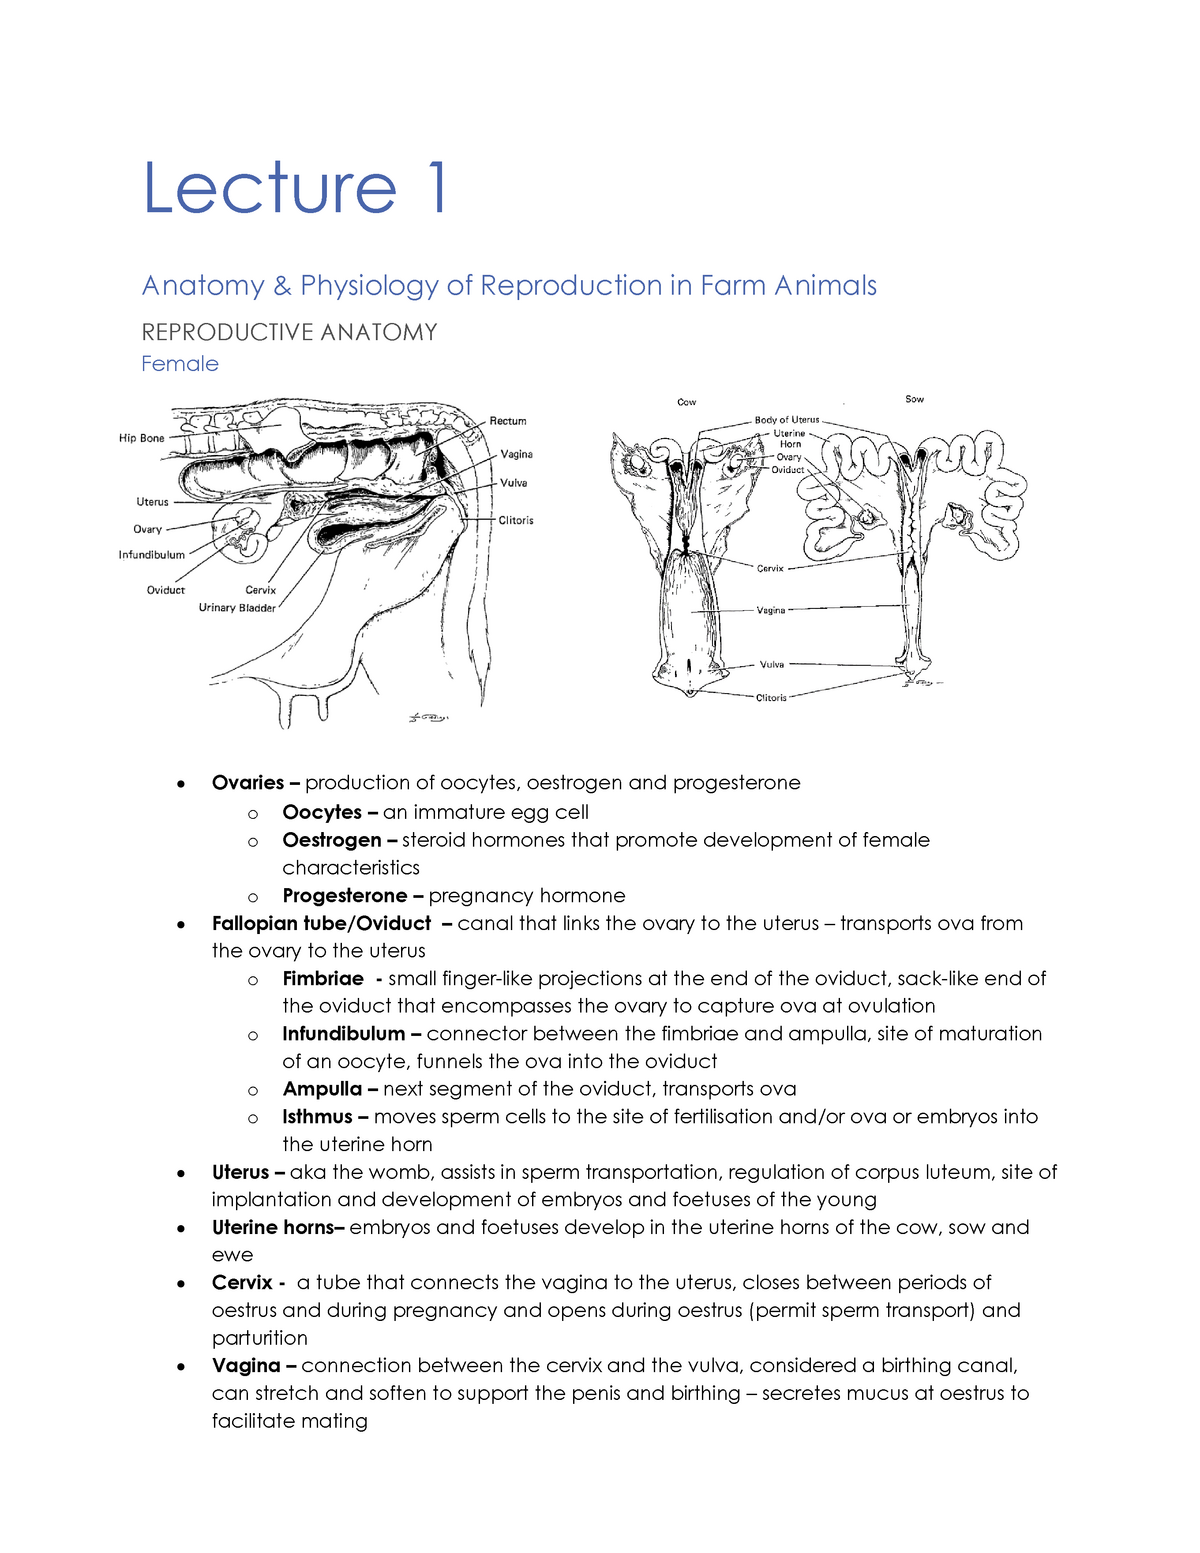 Lecture notes, lectures 1-7 - Lecture 1 Anatomy Physiology of Reproduction  in Farm Animals - Studocu